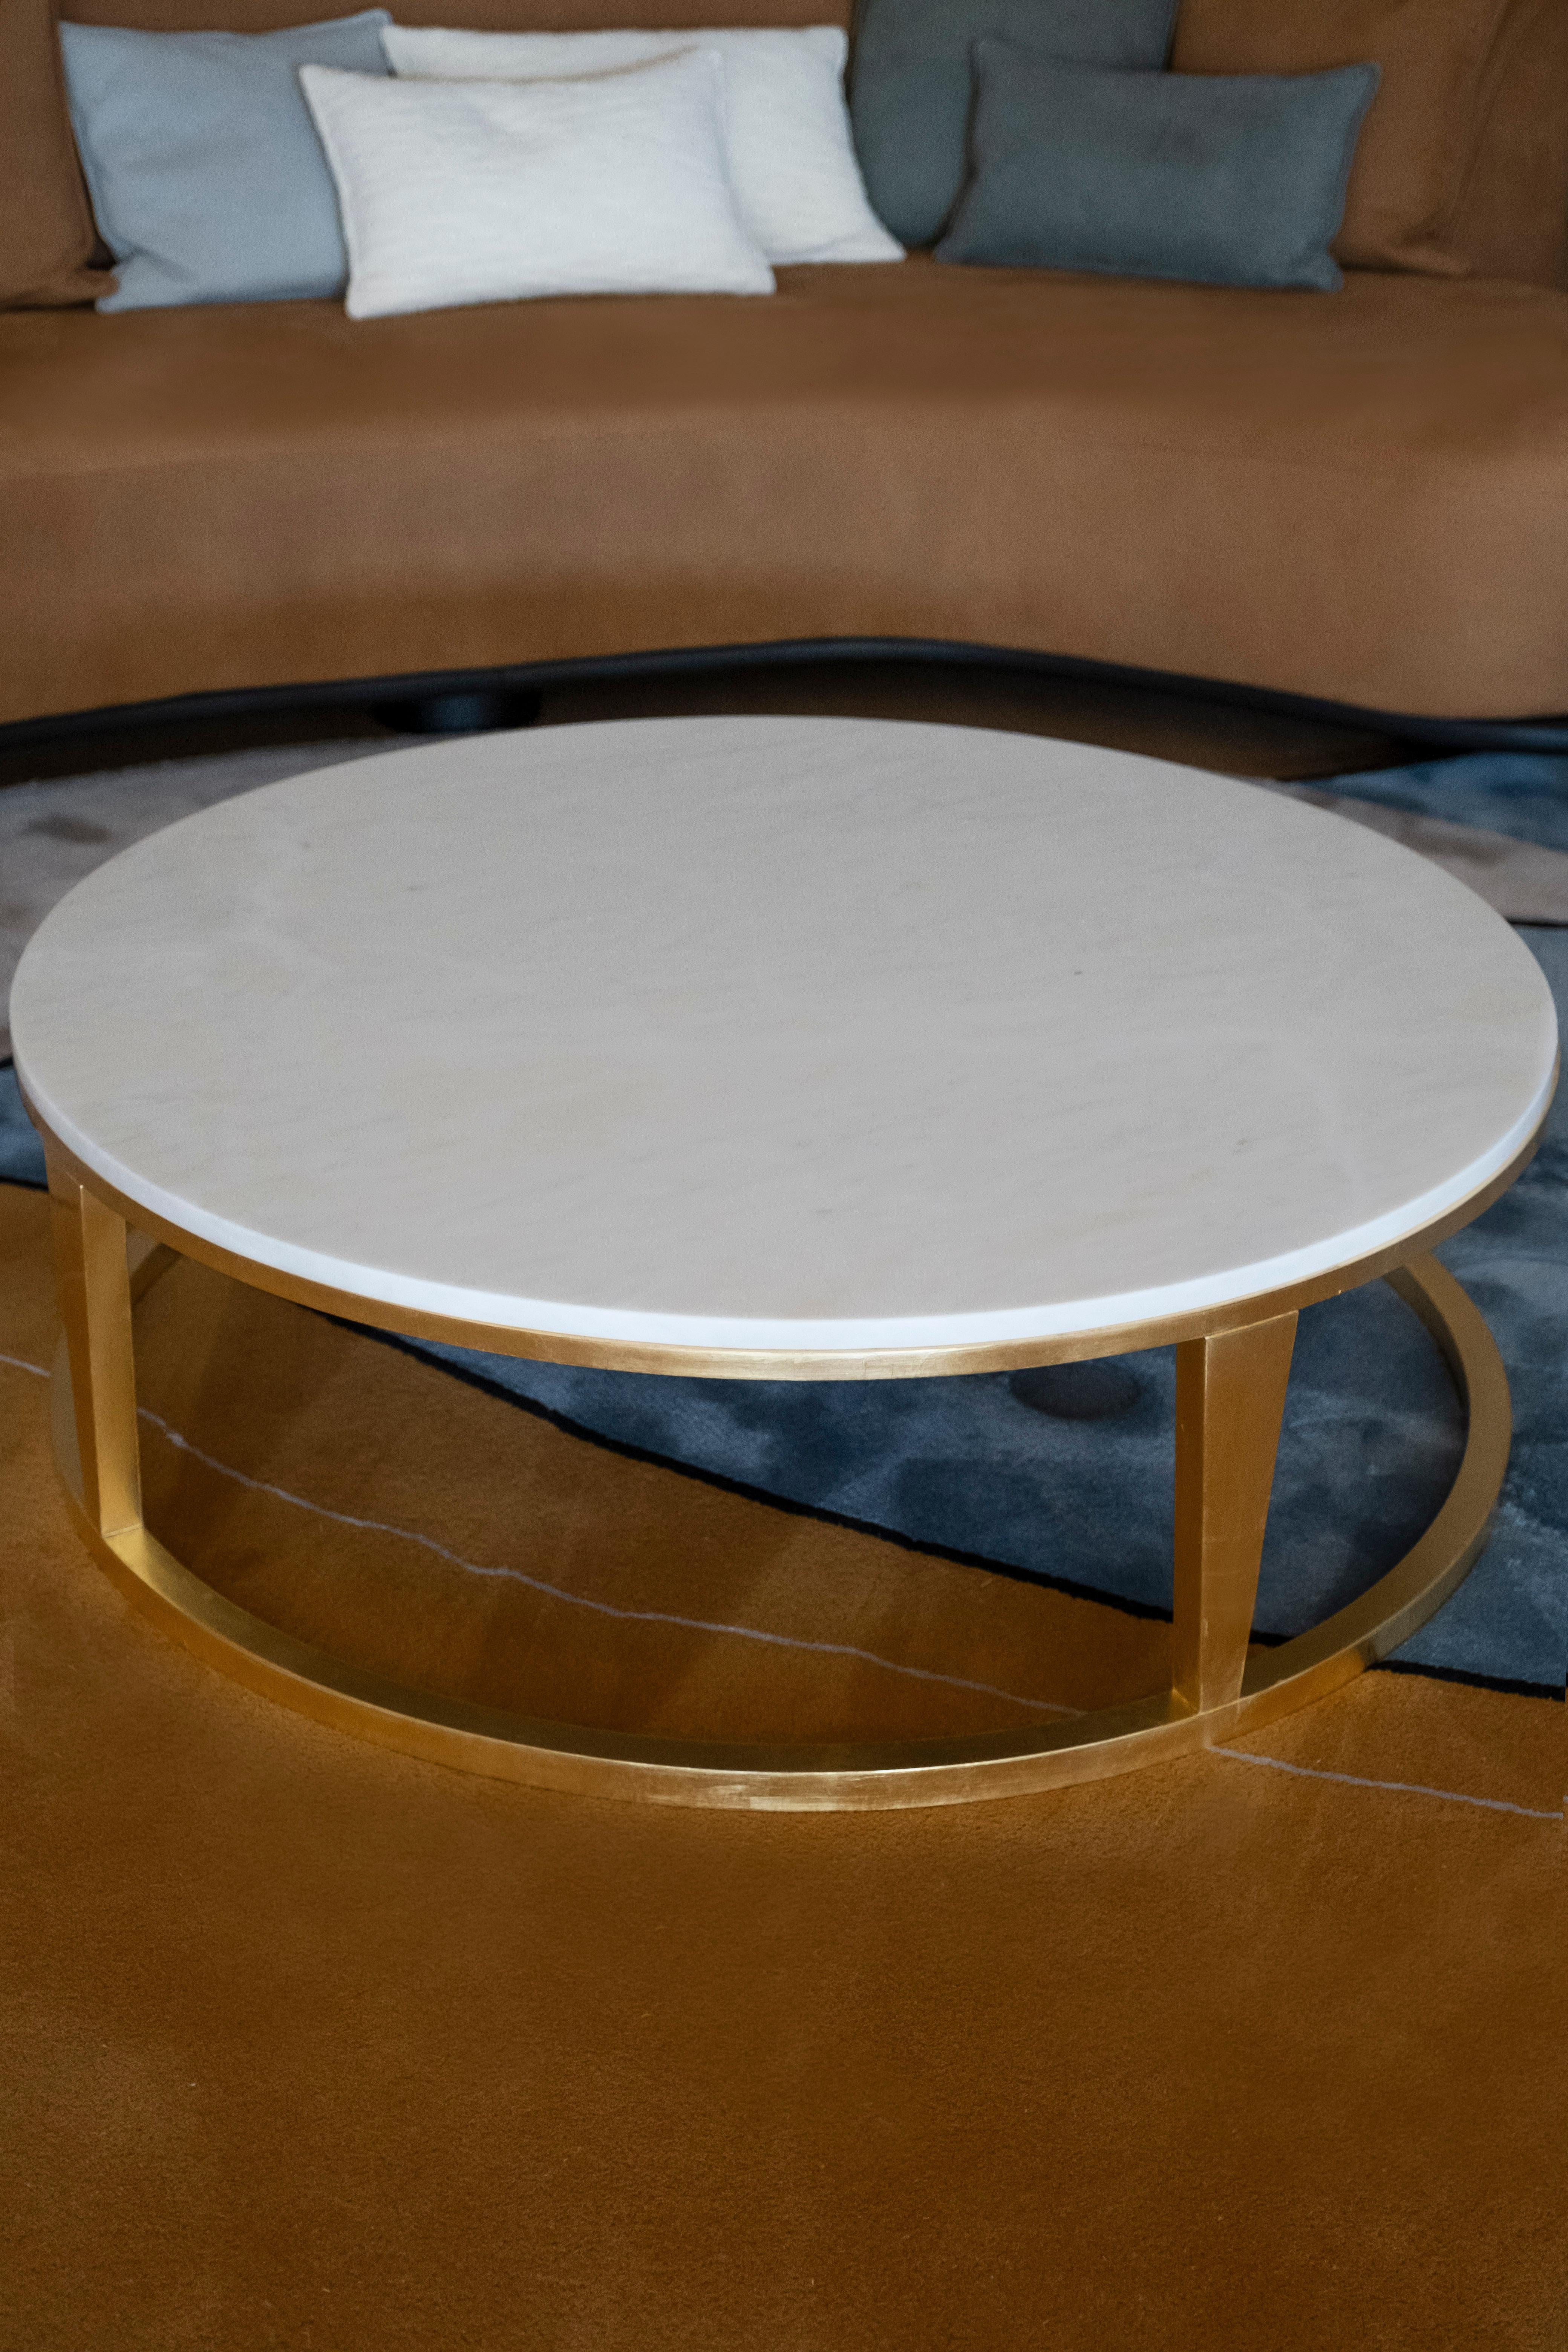 Rubi coffee table, Modern Collection, Handcrafted in Portugal - Europe by GF Modern.

Like a startling ruby ring, our magnificent Rubi side table represents the dawn of a new modern era. The contrast between the Calacatta Bianco stone texture on